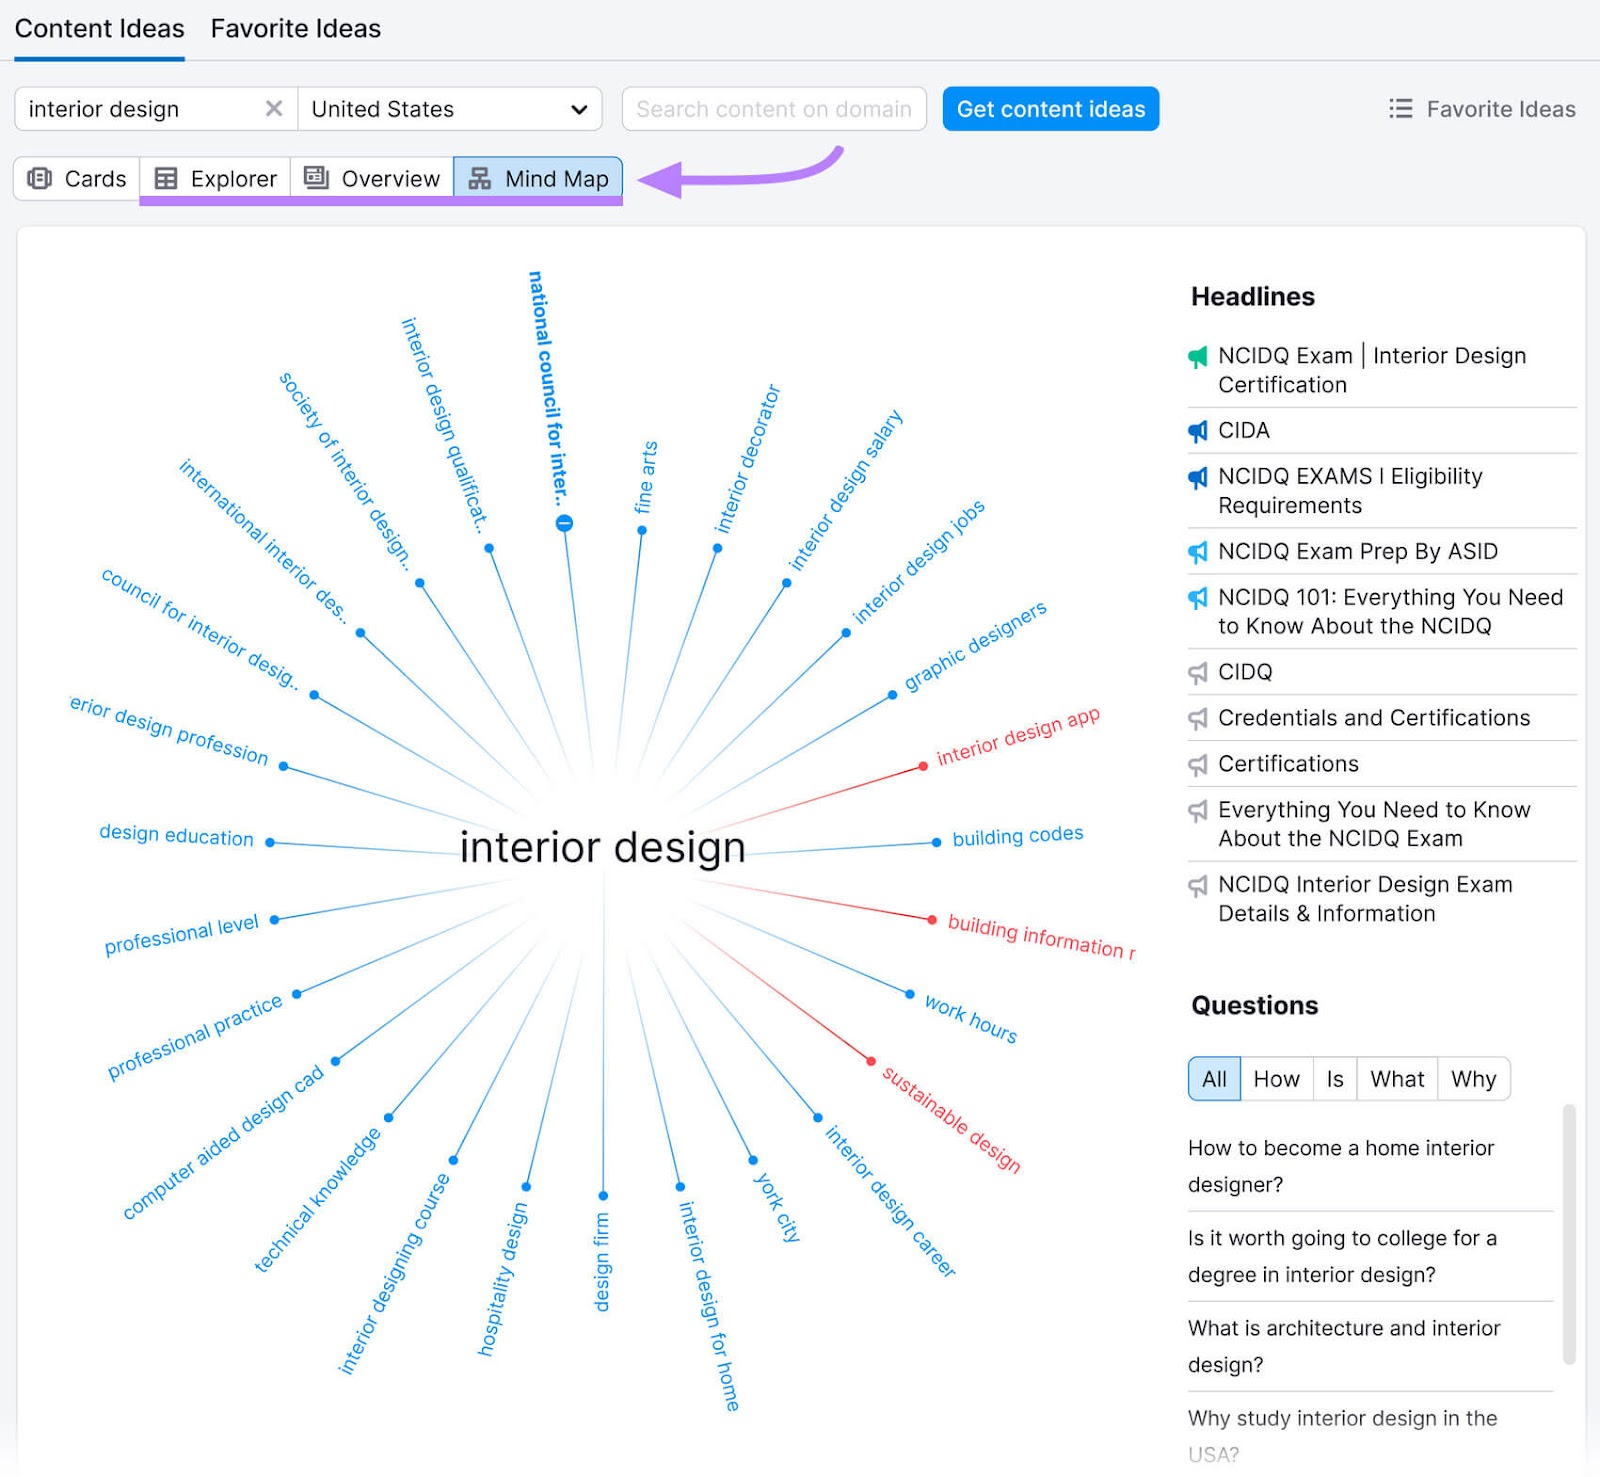 A Mind Map for "interior design" in Topic Research tool